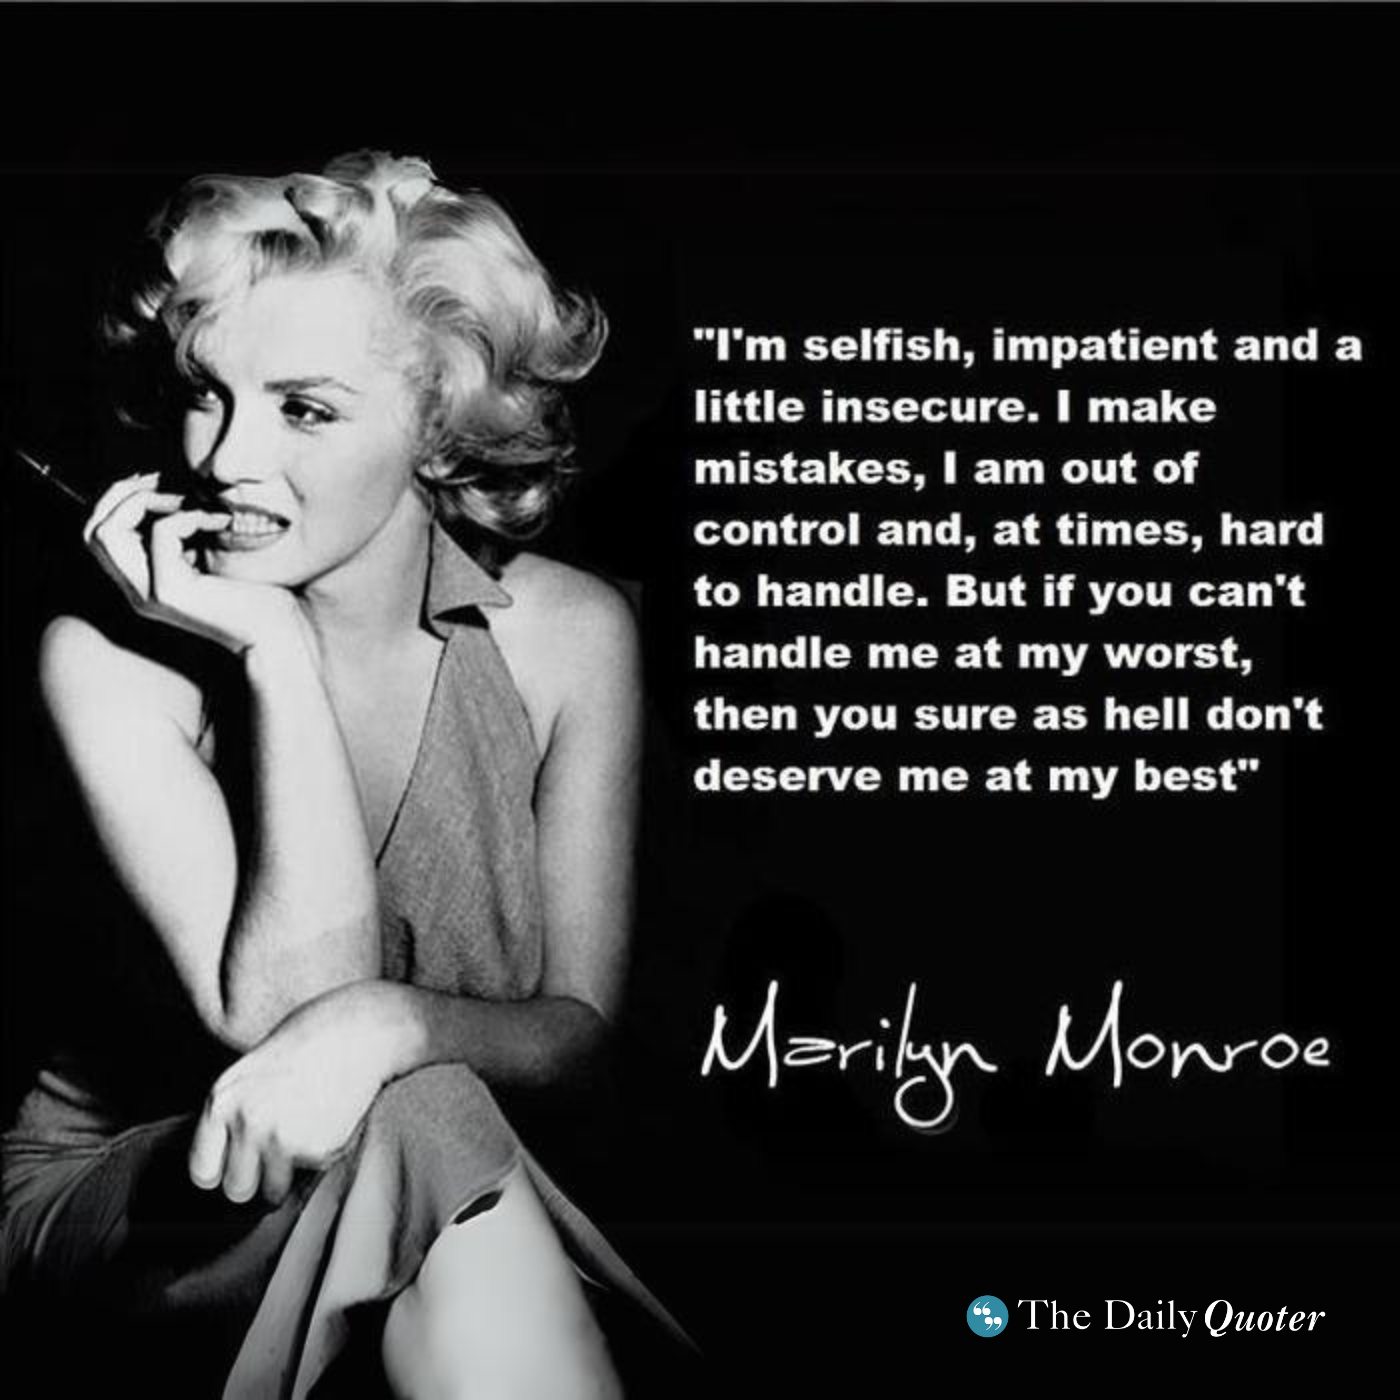 "if you can't handle me at my worst, then you sure as hell don't deserve me at my best"-Marilyn Monroe